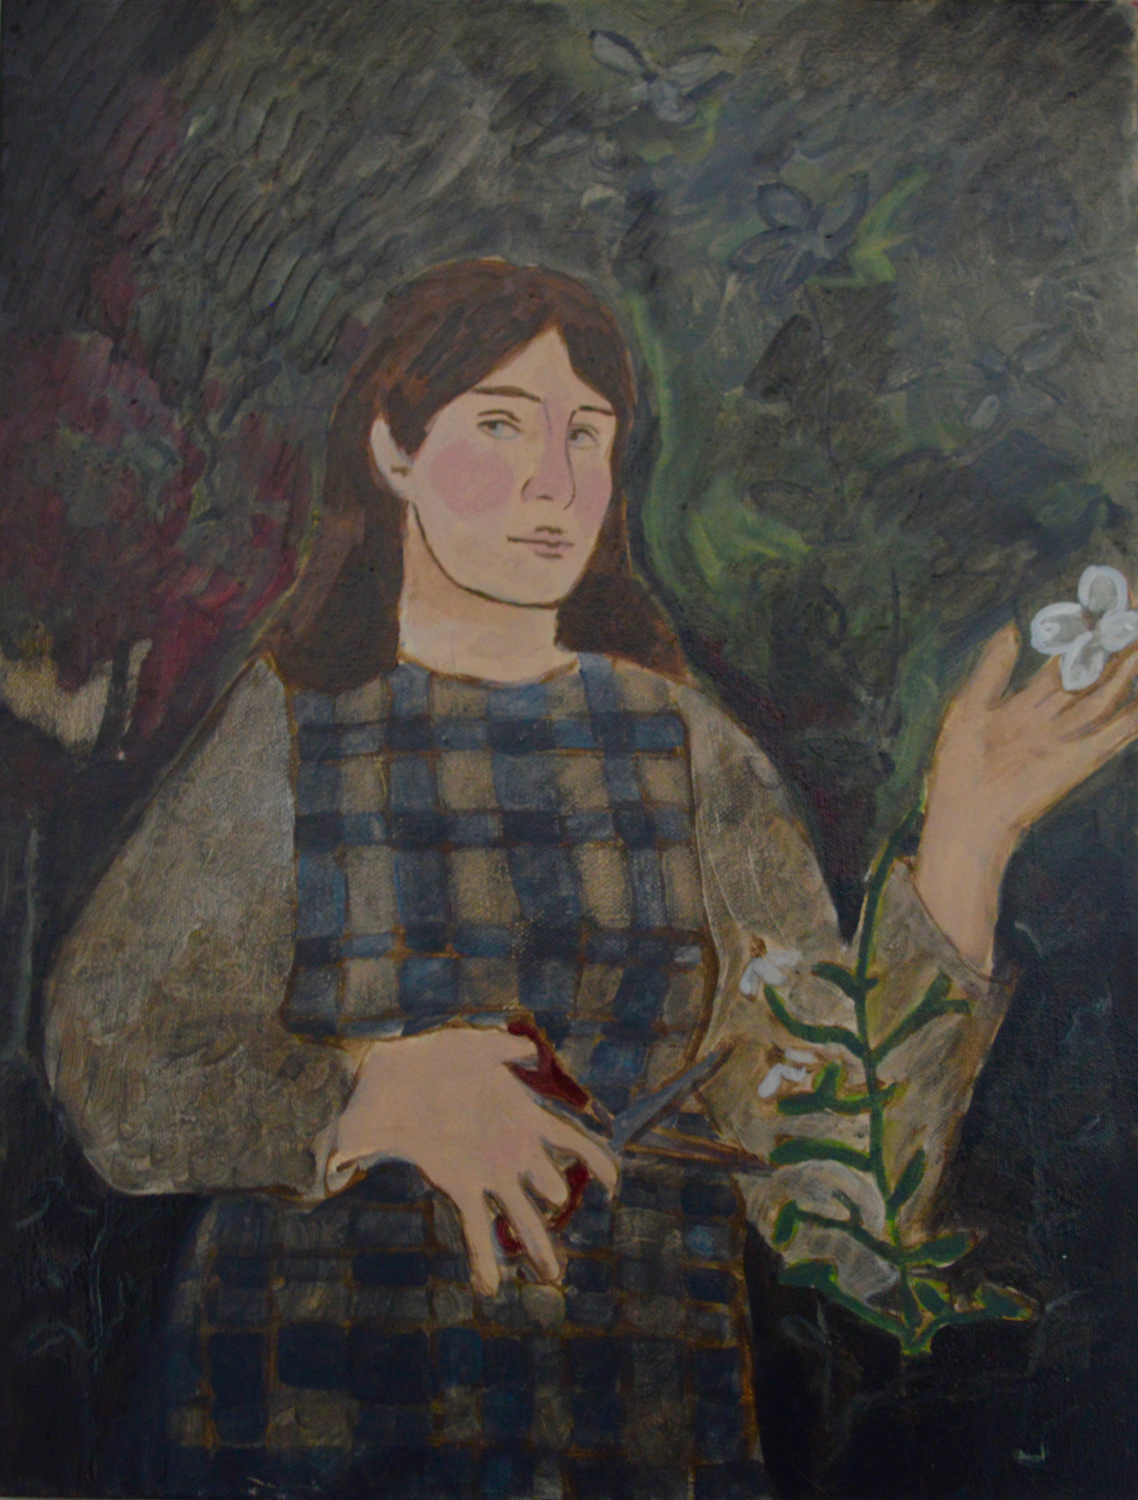 A girl stands in darkness, one hand holding a flower, the other a pair of scissors and she is about to cut a branch.